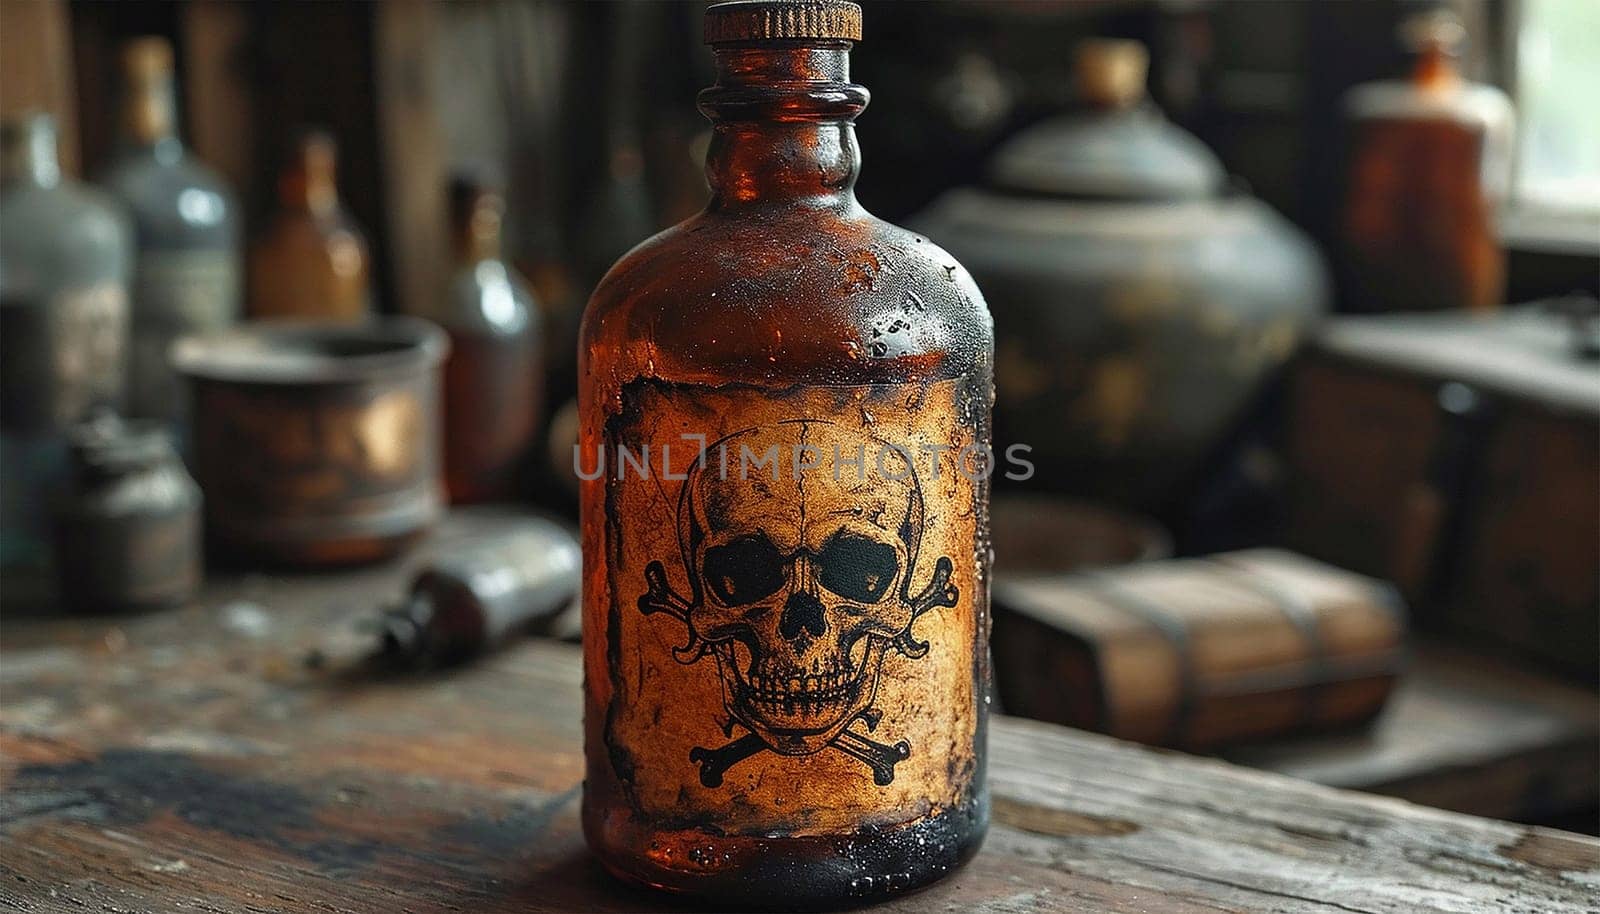 Poison bottle with skull and bones stands among pharmaceutical bottles. Danger sign, symbol of death. Concept background on poison poisoning, pharmaceutical, chemistry, medical, old science topic. by Annebel146